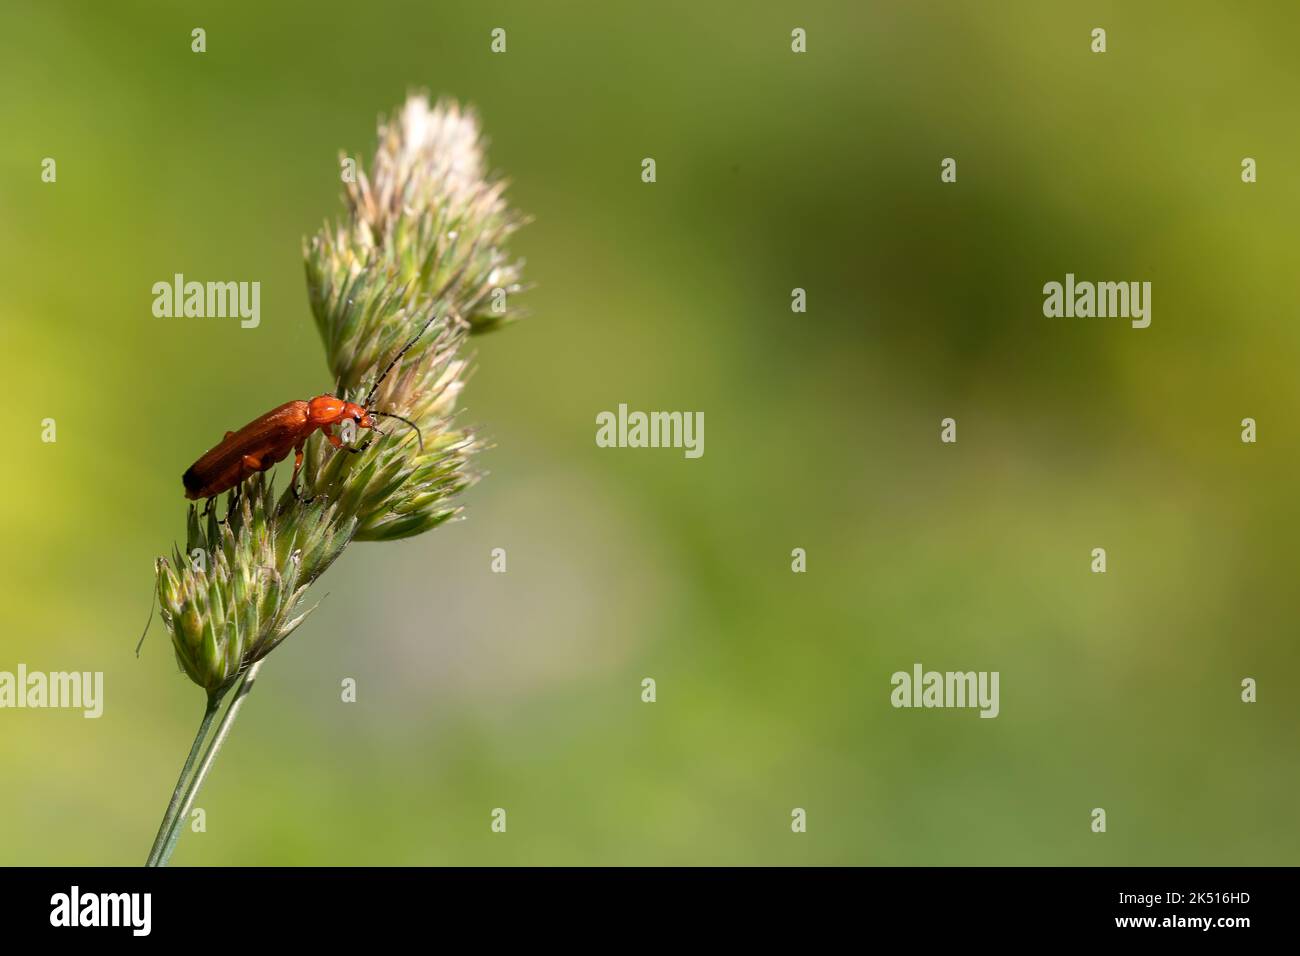 fulva beetle on a grass. green background with space for copy space. macro nature and fauna photography. nature concept Stock Photo